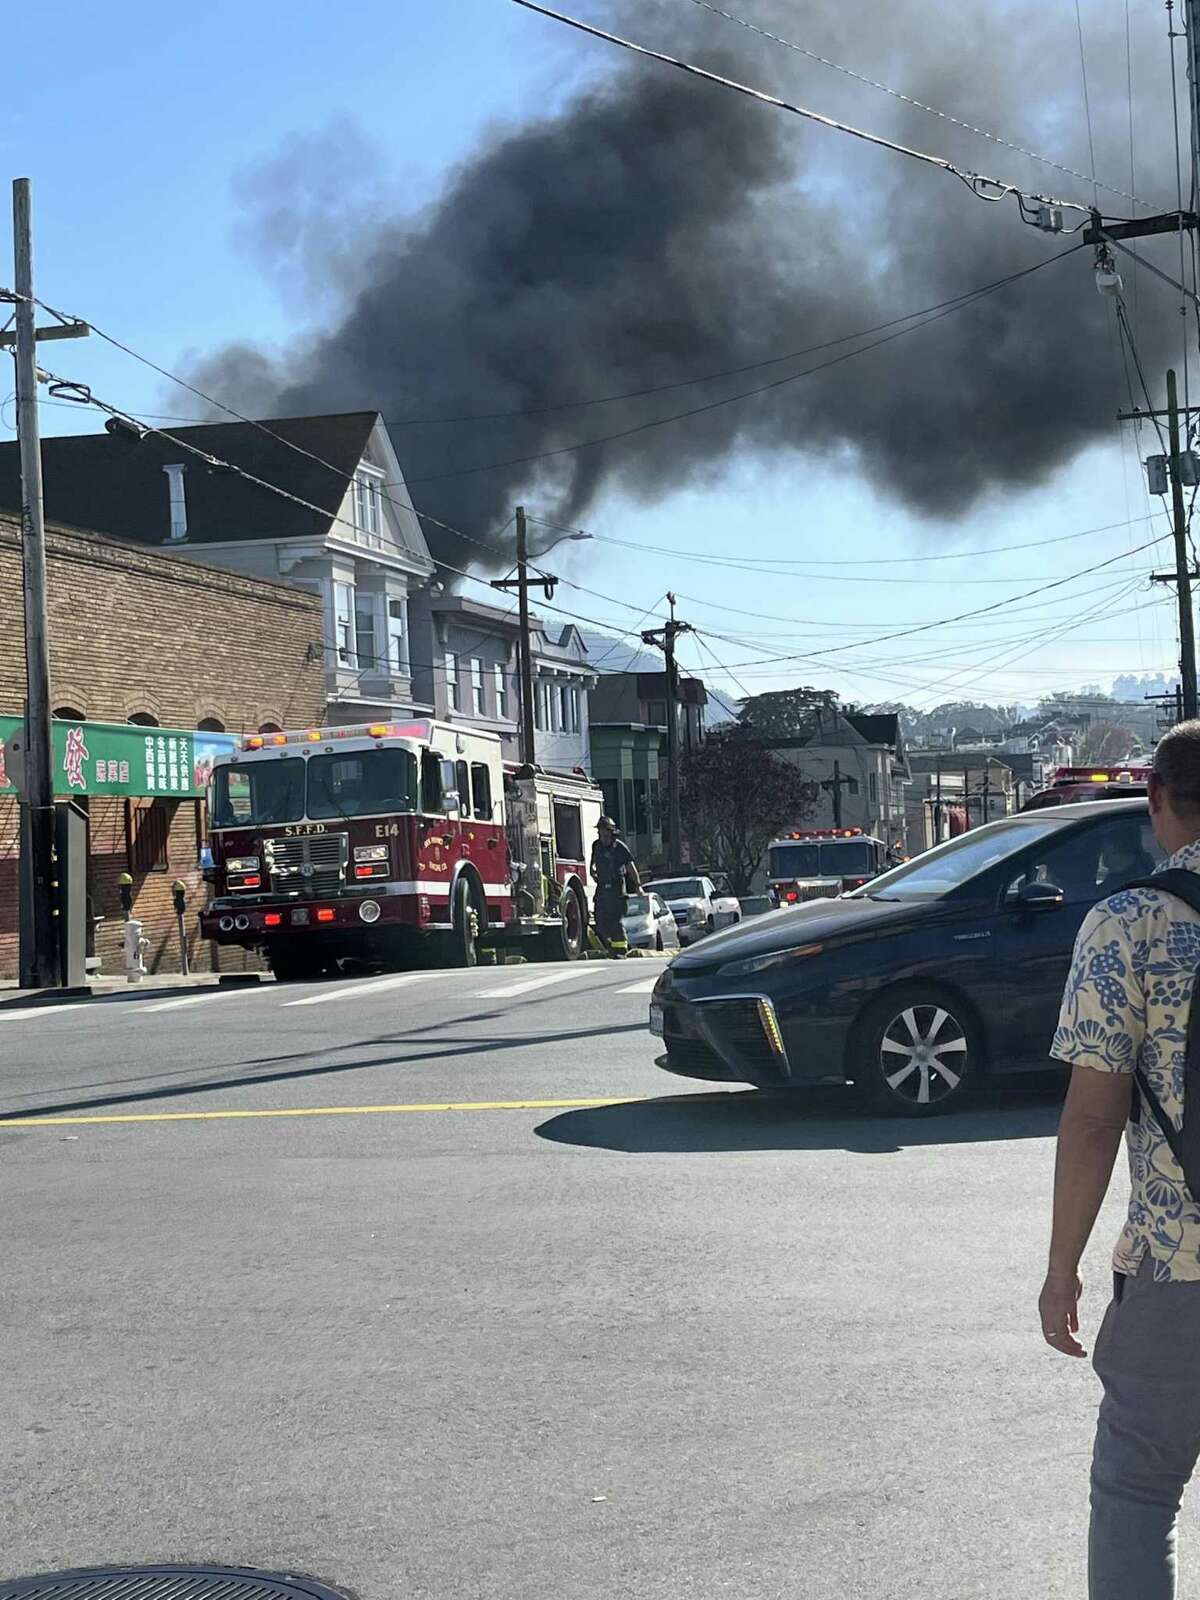 A three-alarm fire at 324 10th Avenue in San Francisco on the afternoon of Saturday, February 12, where the fire department was in the process of rescuing one victim.